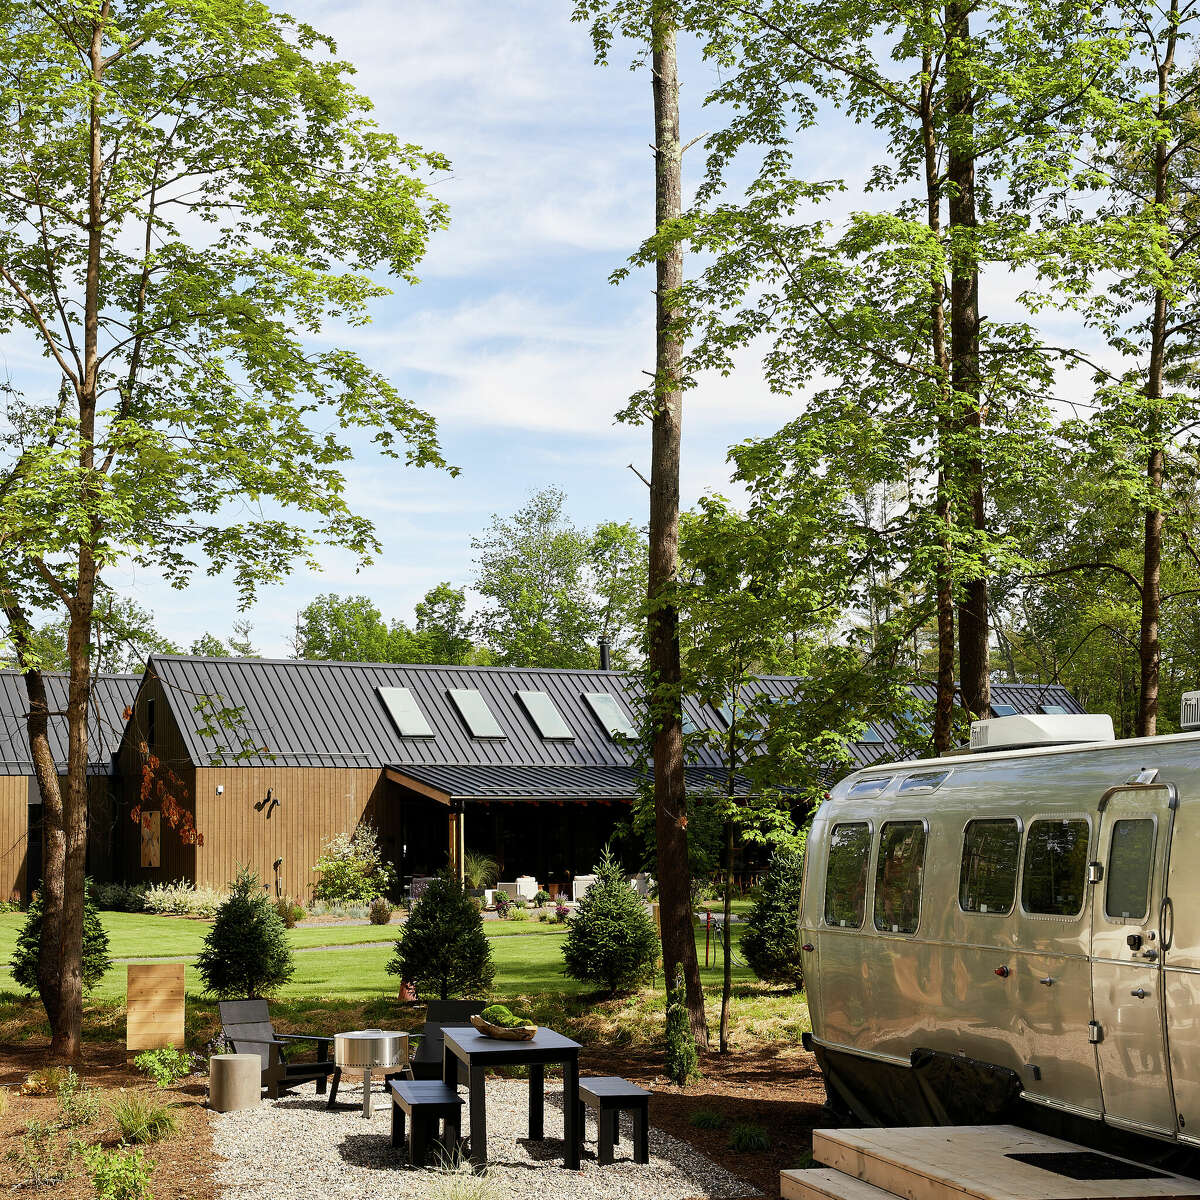 Since 2013, AutoCamp has given throes of adventurers access to America’s landscapes through its unique lodging model. Such locations include Joshua Tree, Yosemite, Cape Cod, and the Catskills (pictured).